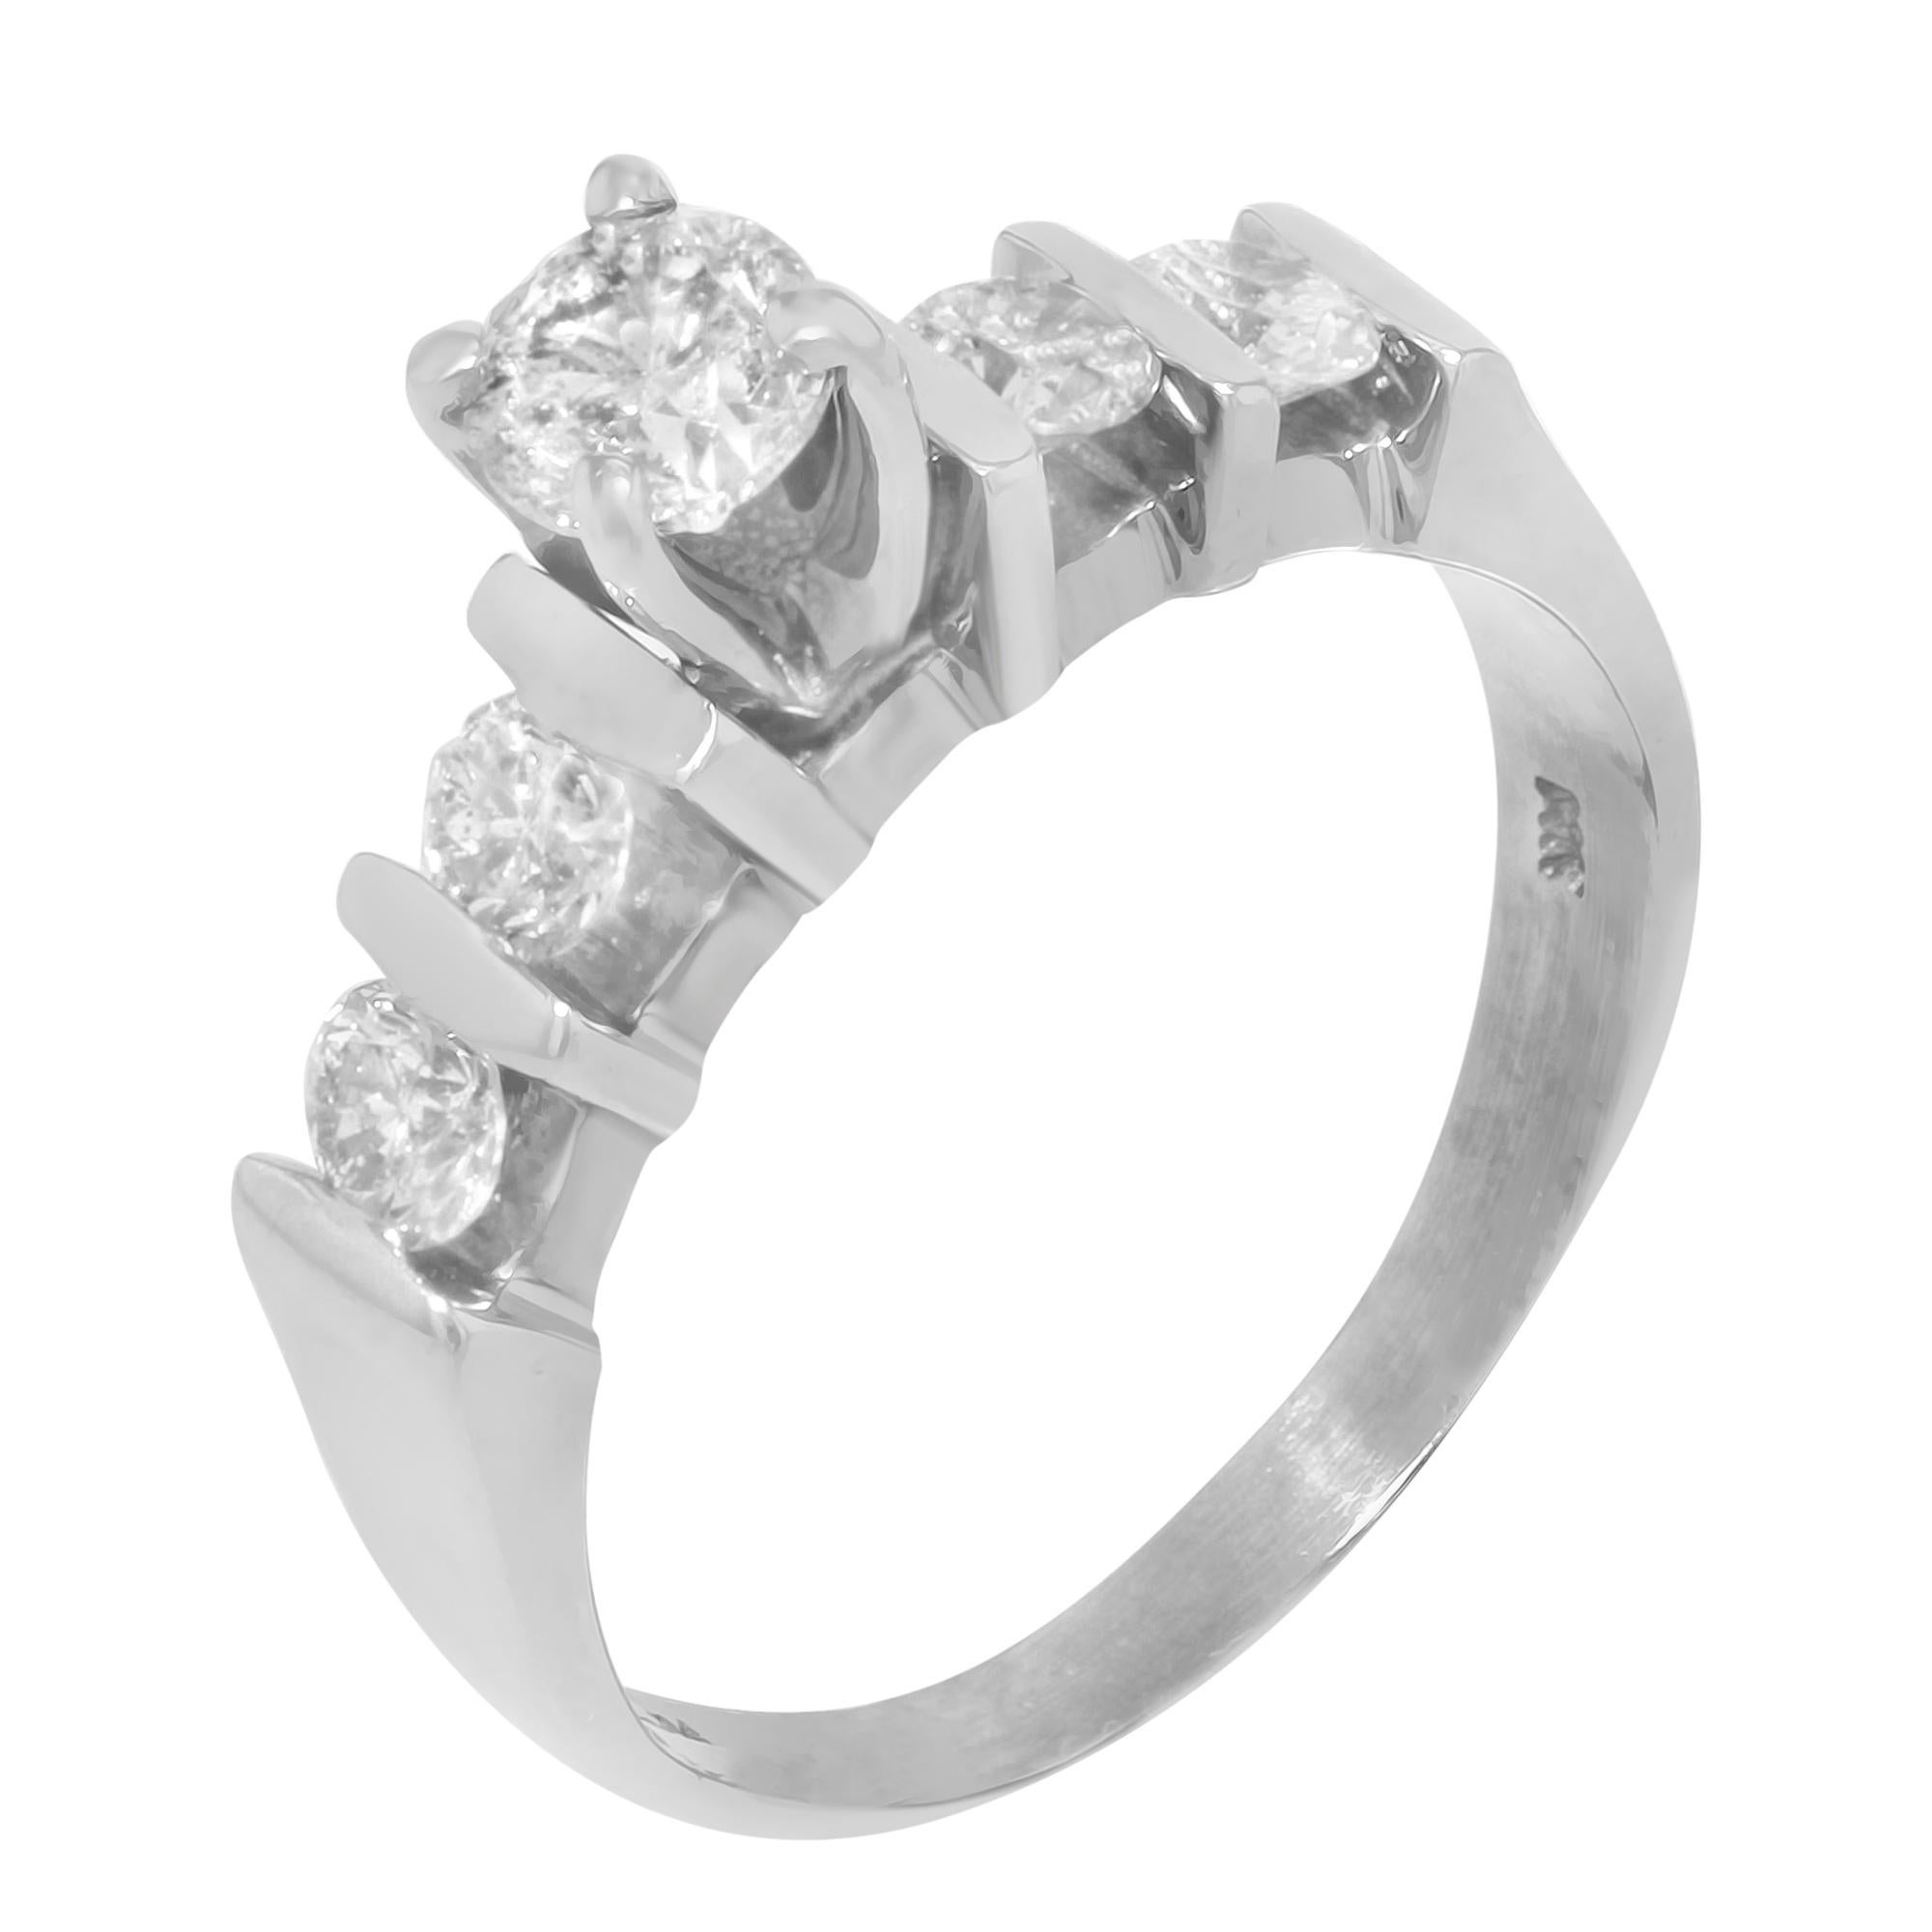 This gorgeous diamond engagement ring is encrusted with a center prong set round cut white diamond and accented with two round cut diamonds on each side in bar setting. Crafted in high polished 14K white gold. Total diamond weight: 0.86ct. Ring size